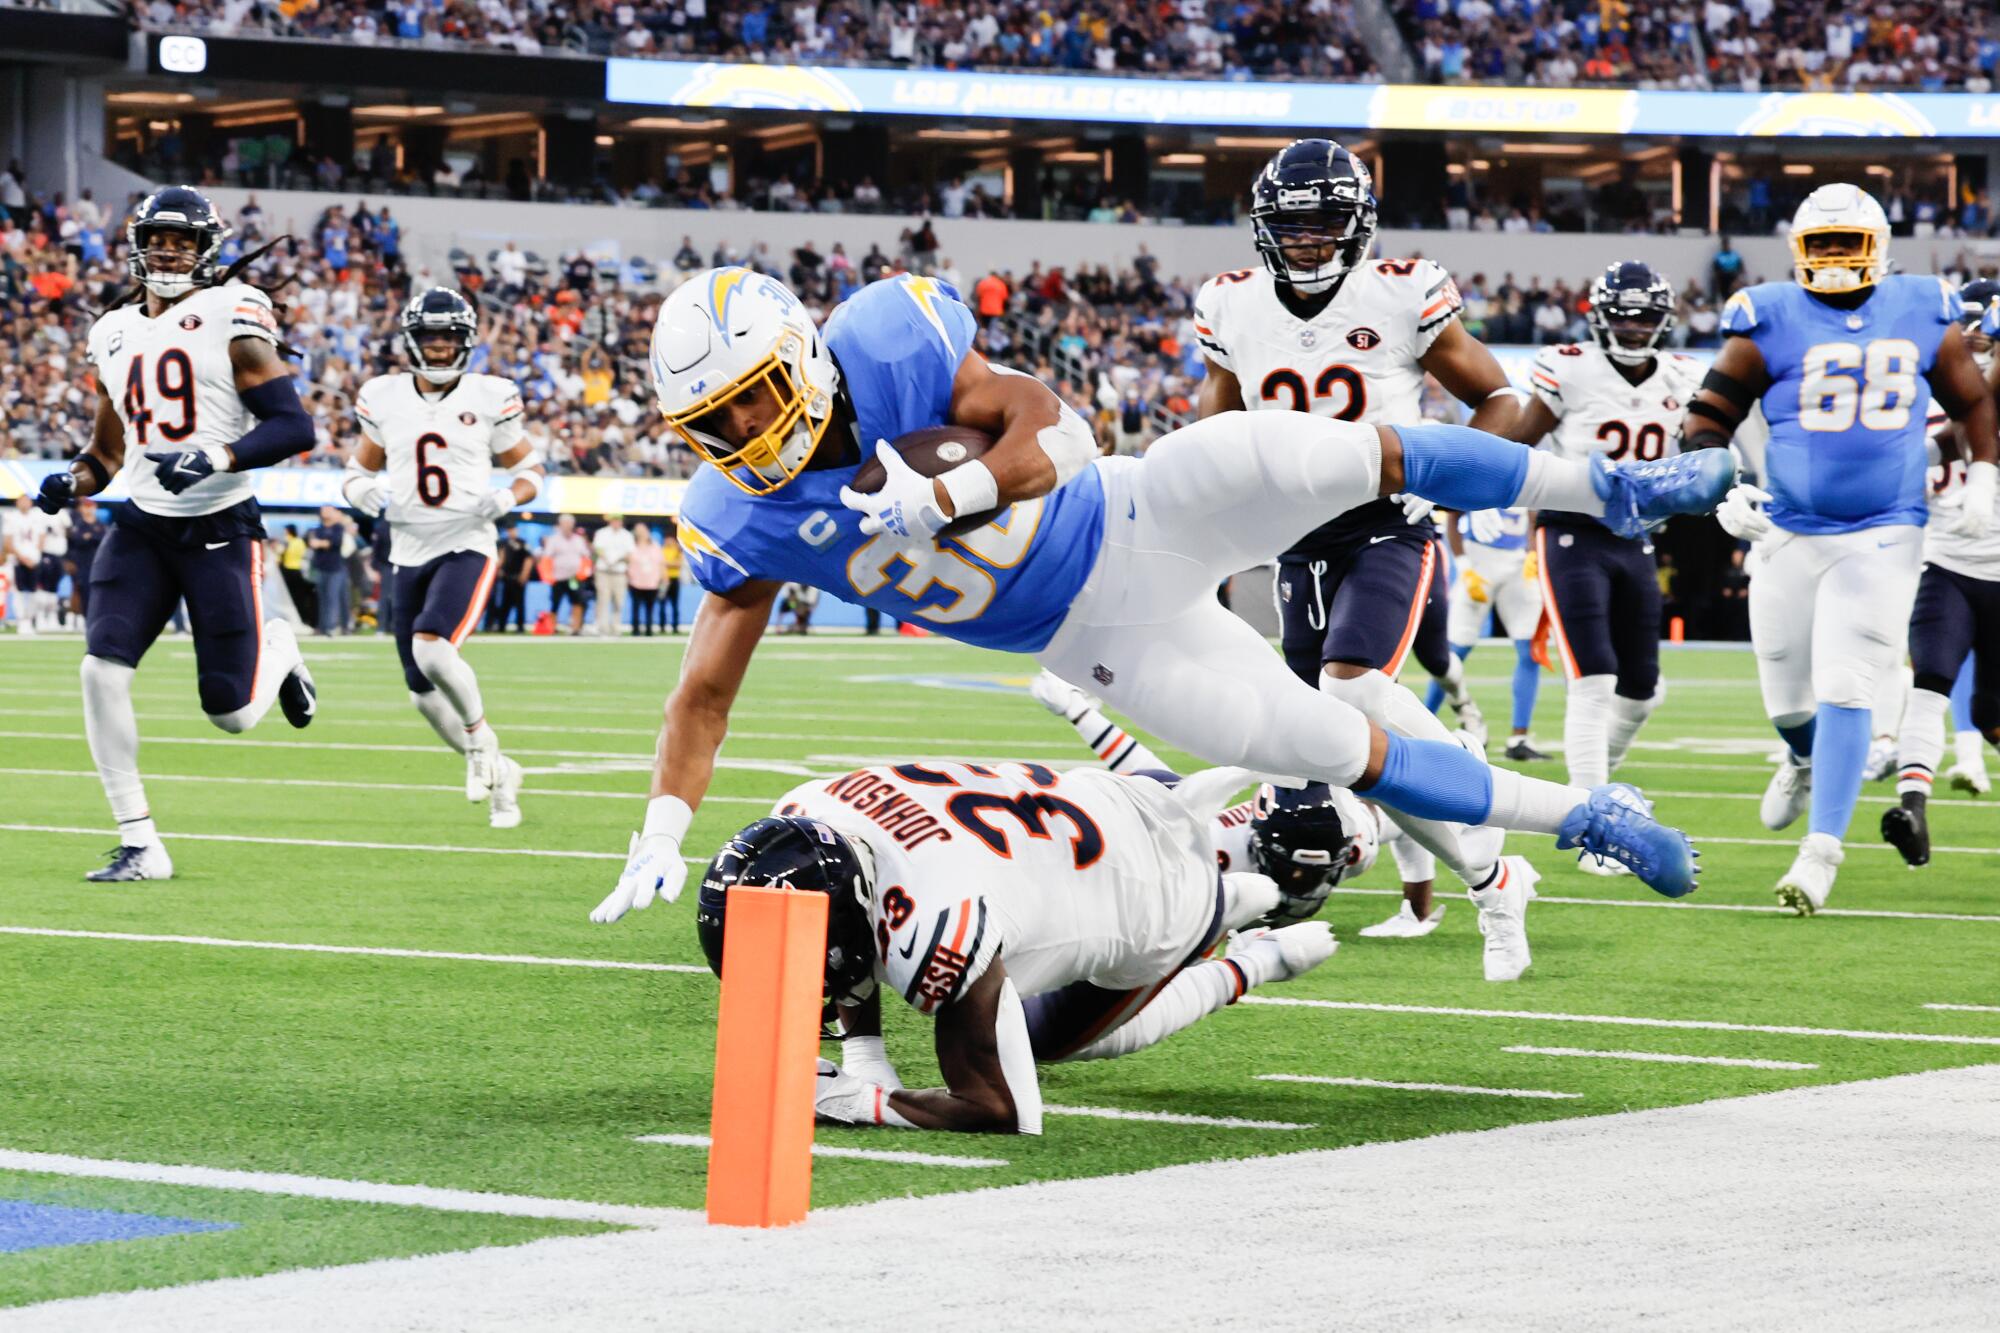 Chargers running back Austin Ekeler dives into the end zone on a 39-yard catch-and-run against the Chicago Bears.